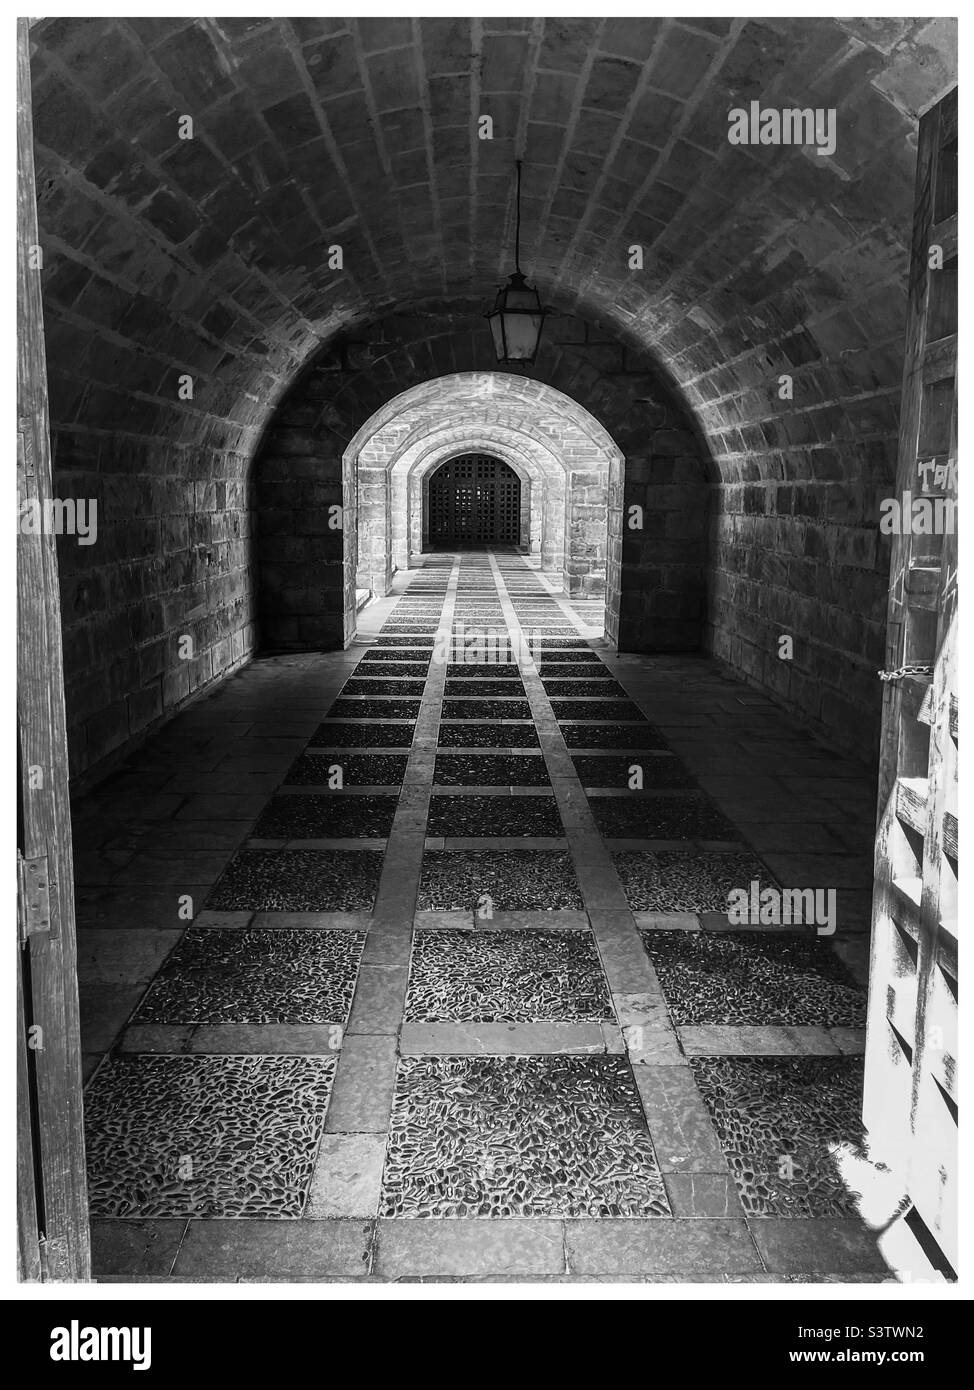 Tunnel through an archway Stock Photo